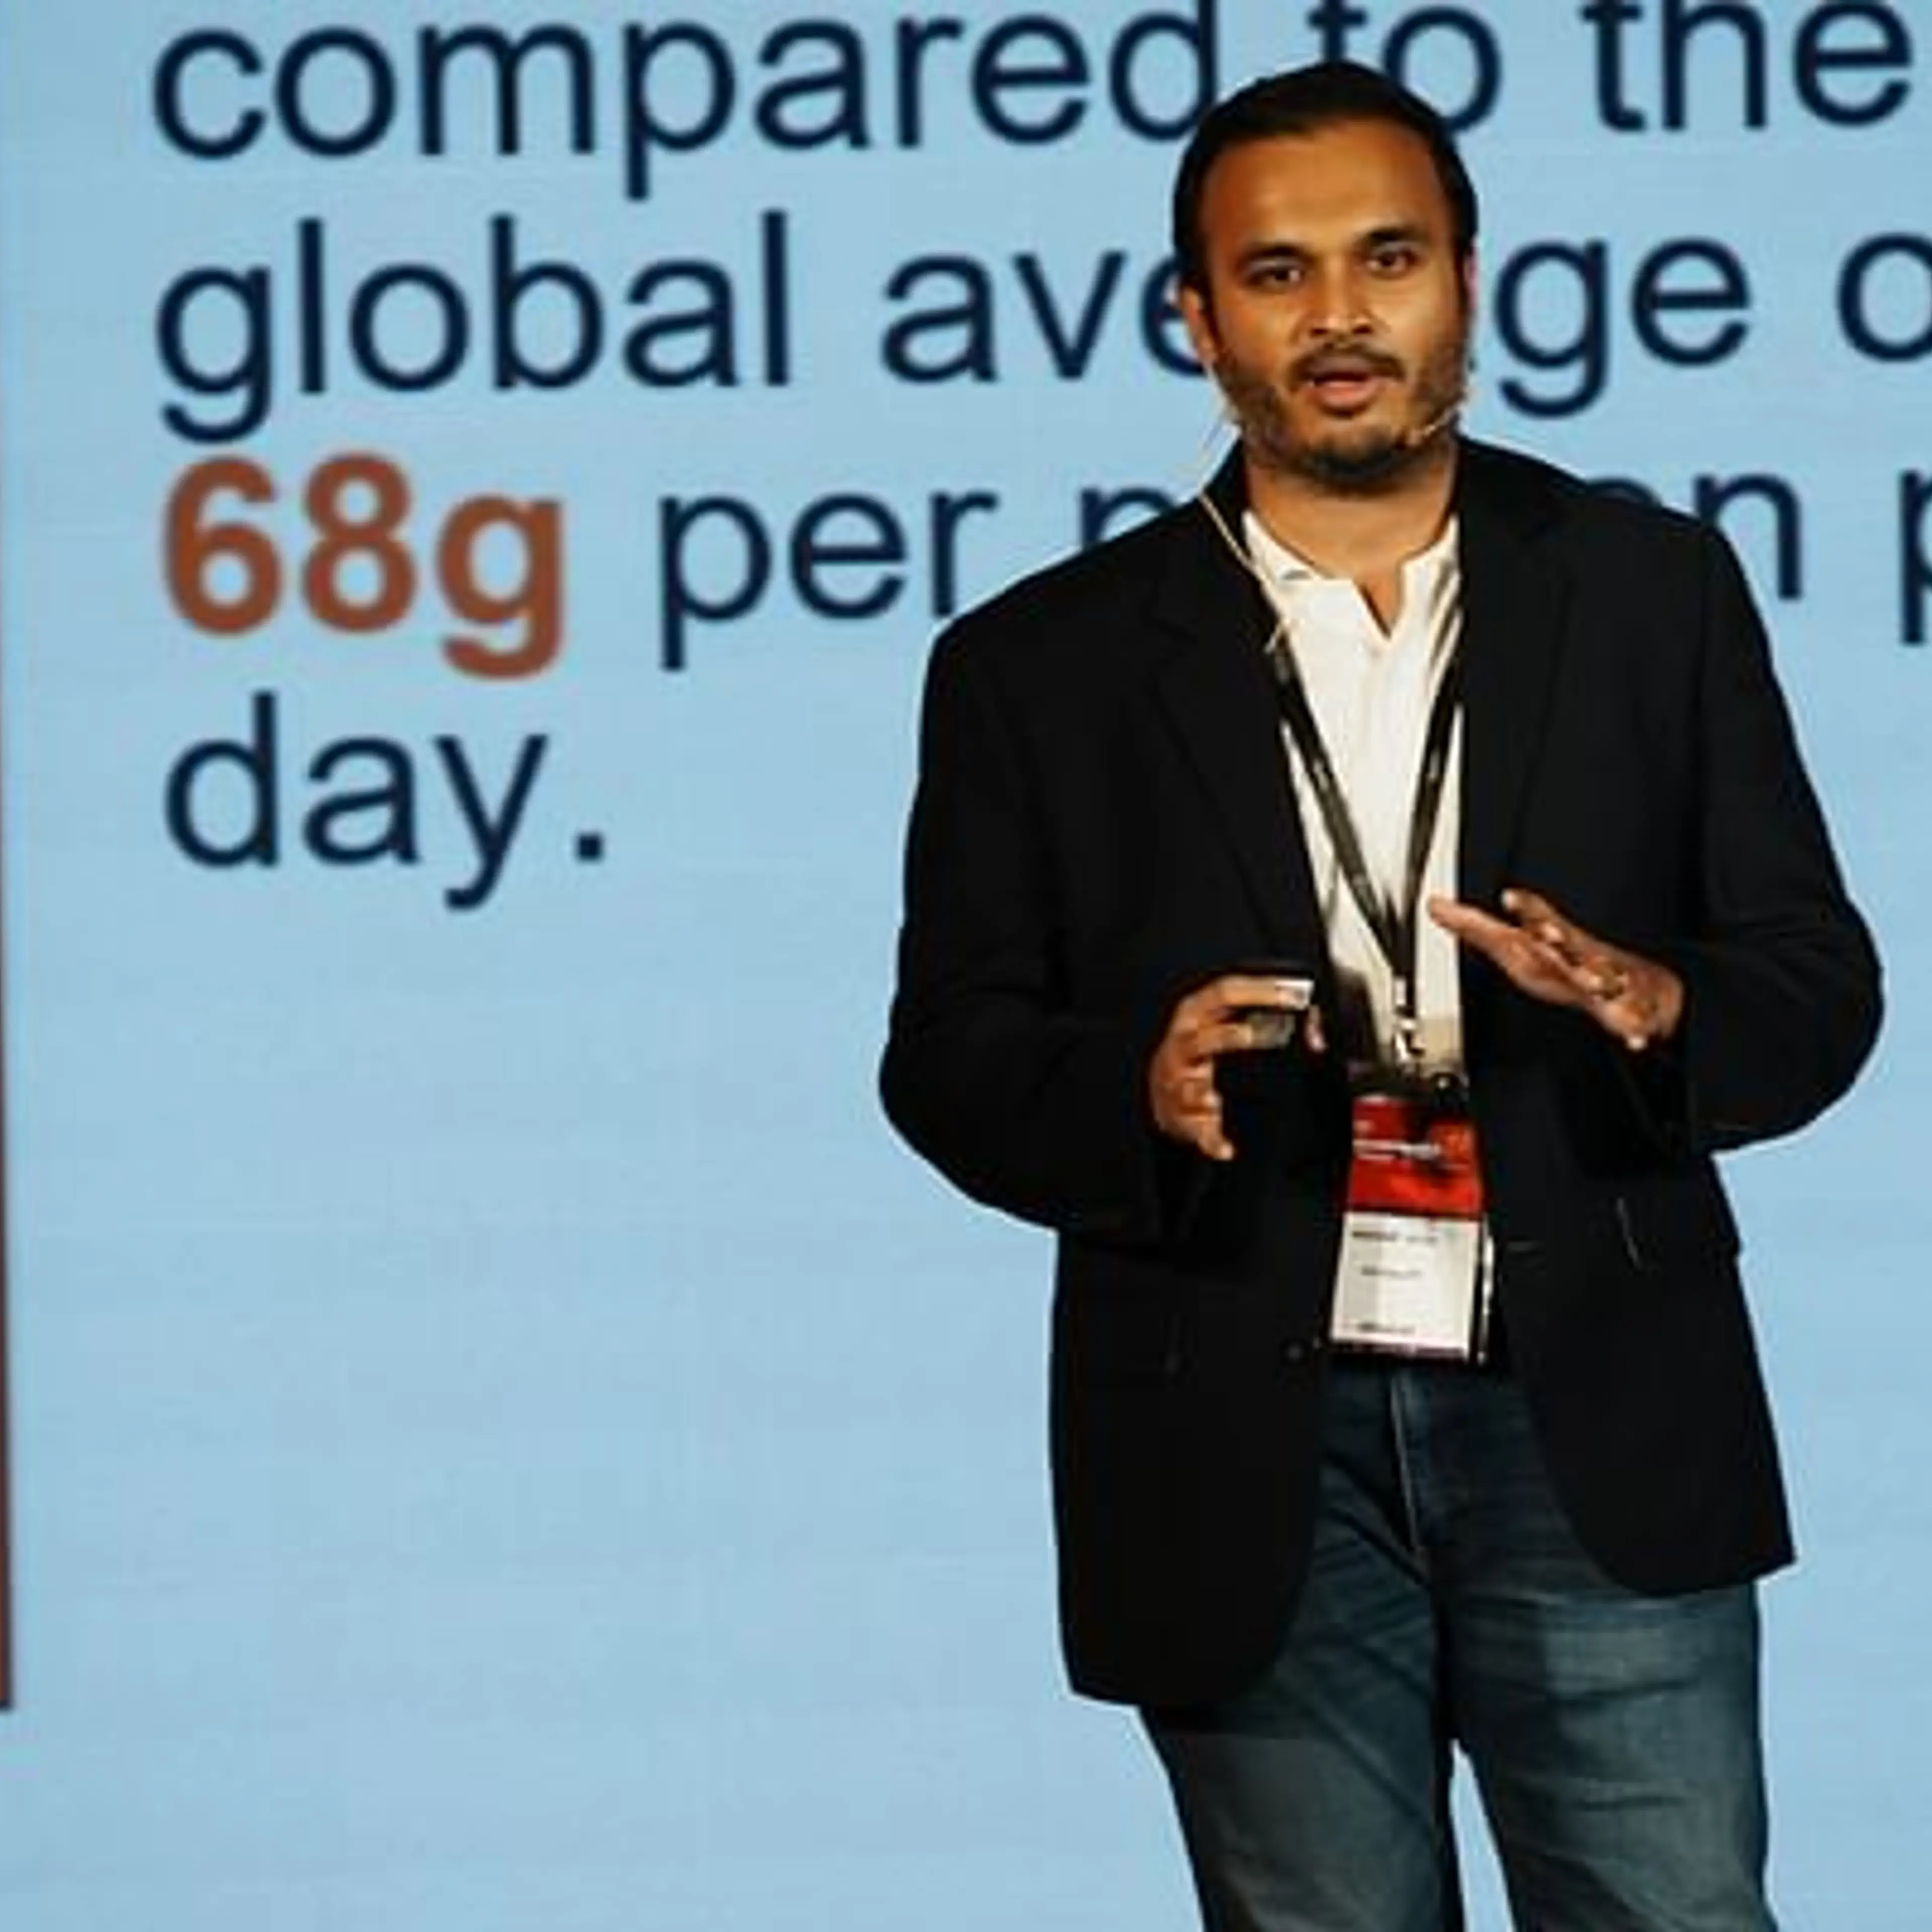 Empowering India's health-conscious generation: Insights from Hyugalife founder’s keynote at TechSparks Mumbai